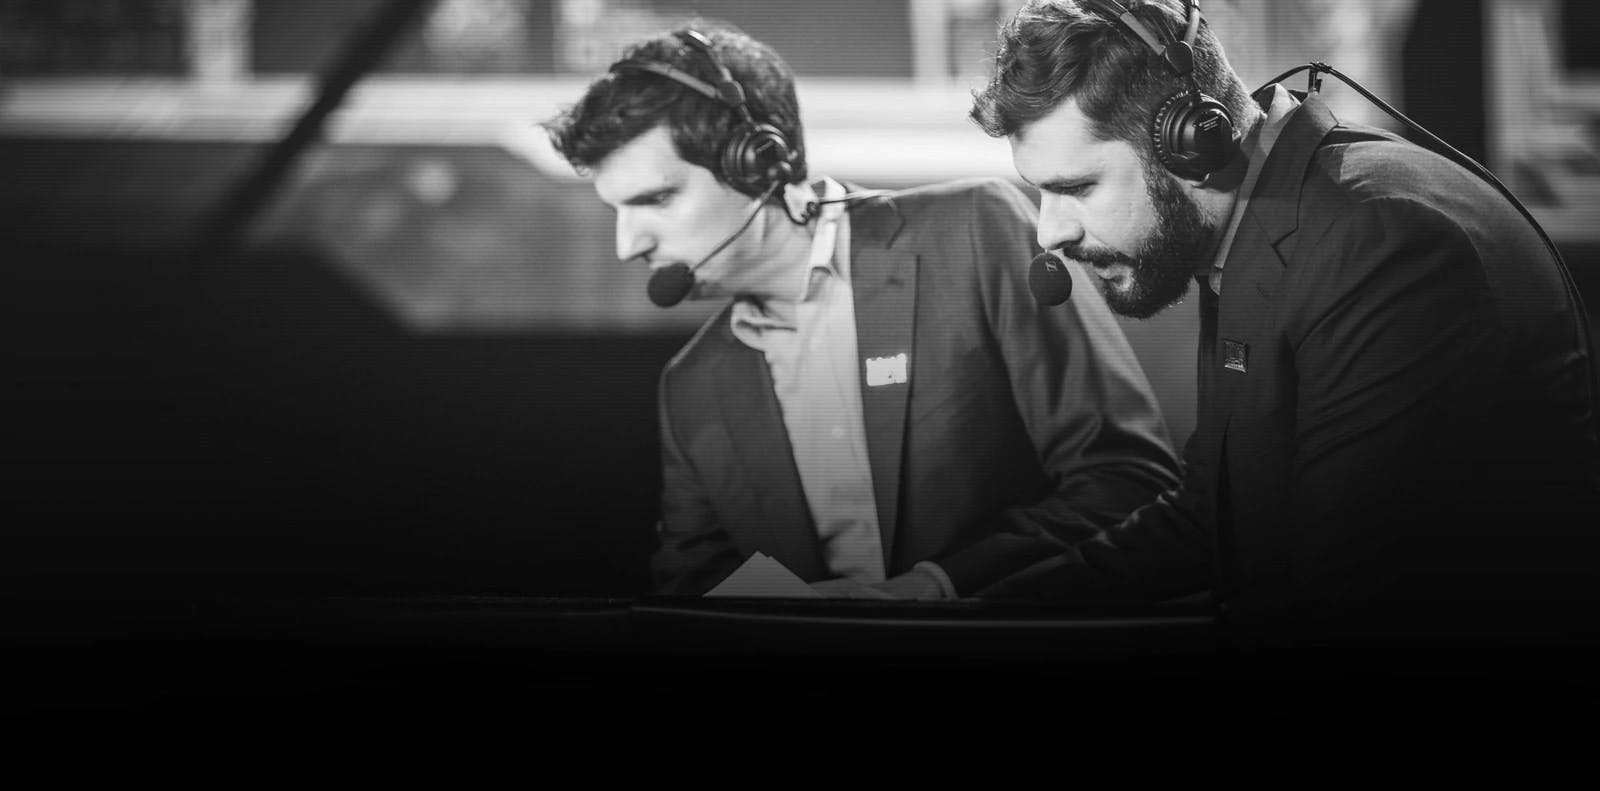 The end of an era - The last Tastosis GSL Finals cast